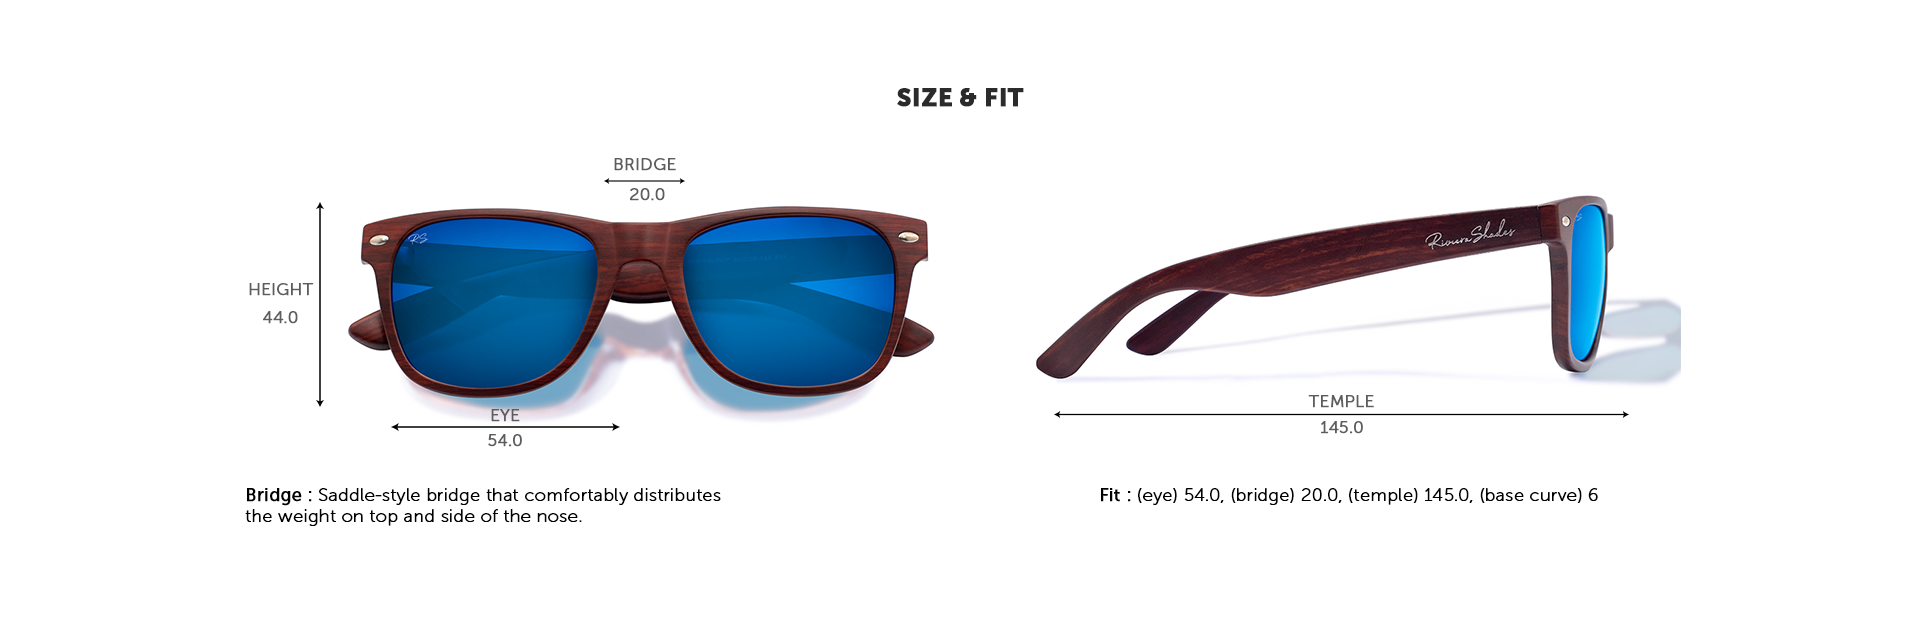 Mahogany - Brown Wood Frame & Sapphire Blue Flash Lenses • Have a ...